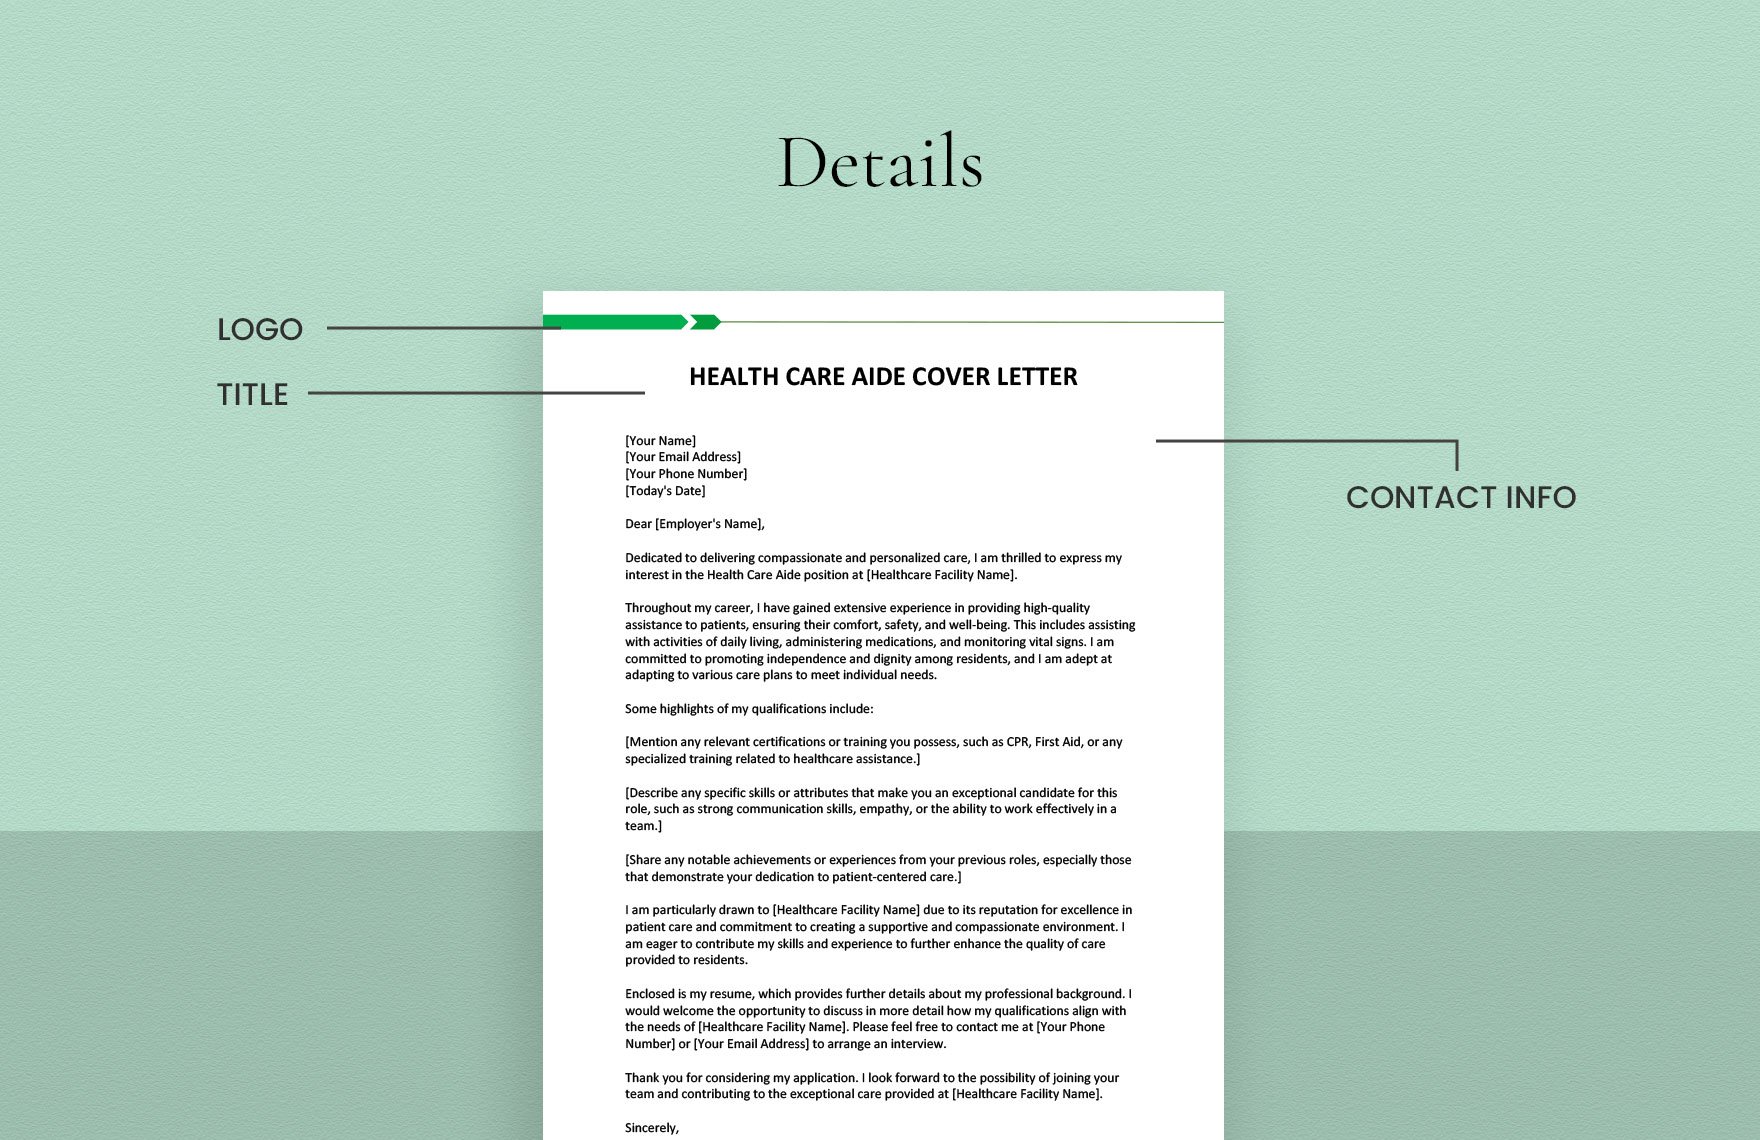 Health Care Aide Cover Letter